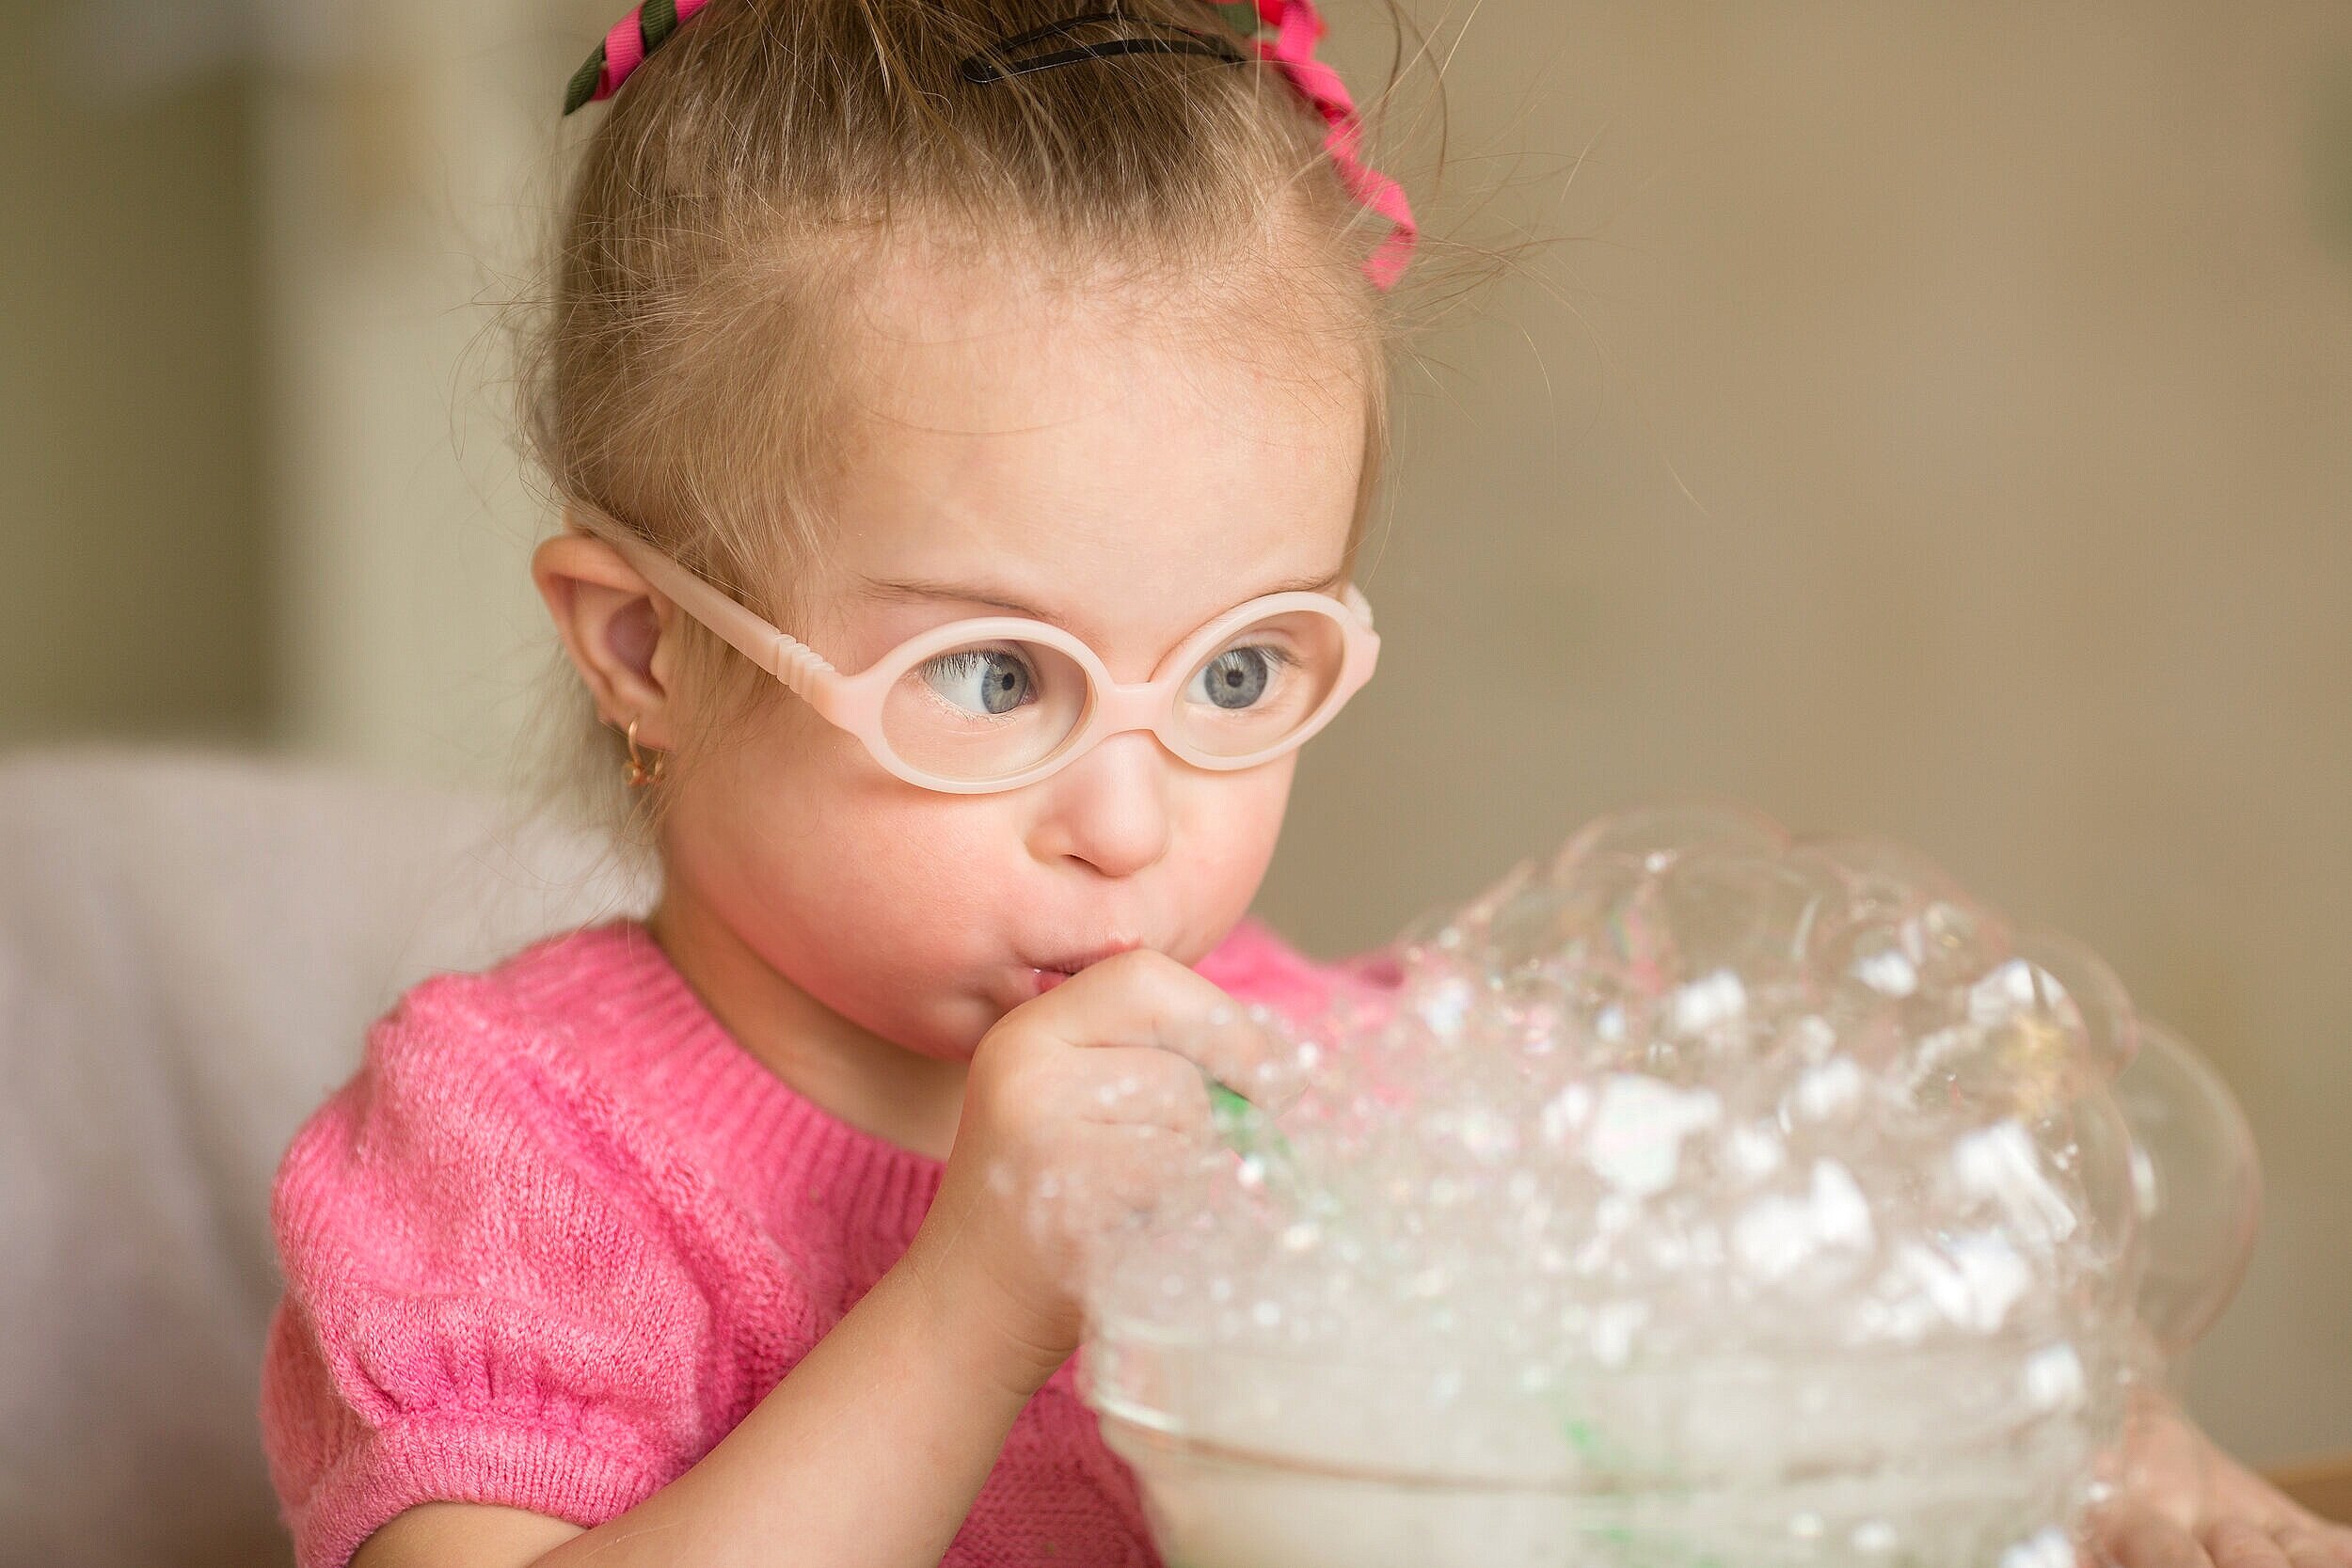 Speech Therapy with Bubbles - Peas and Carrots Speech and Feeding Therapy in Chelmsford, Massachusetts